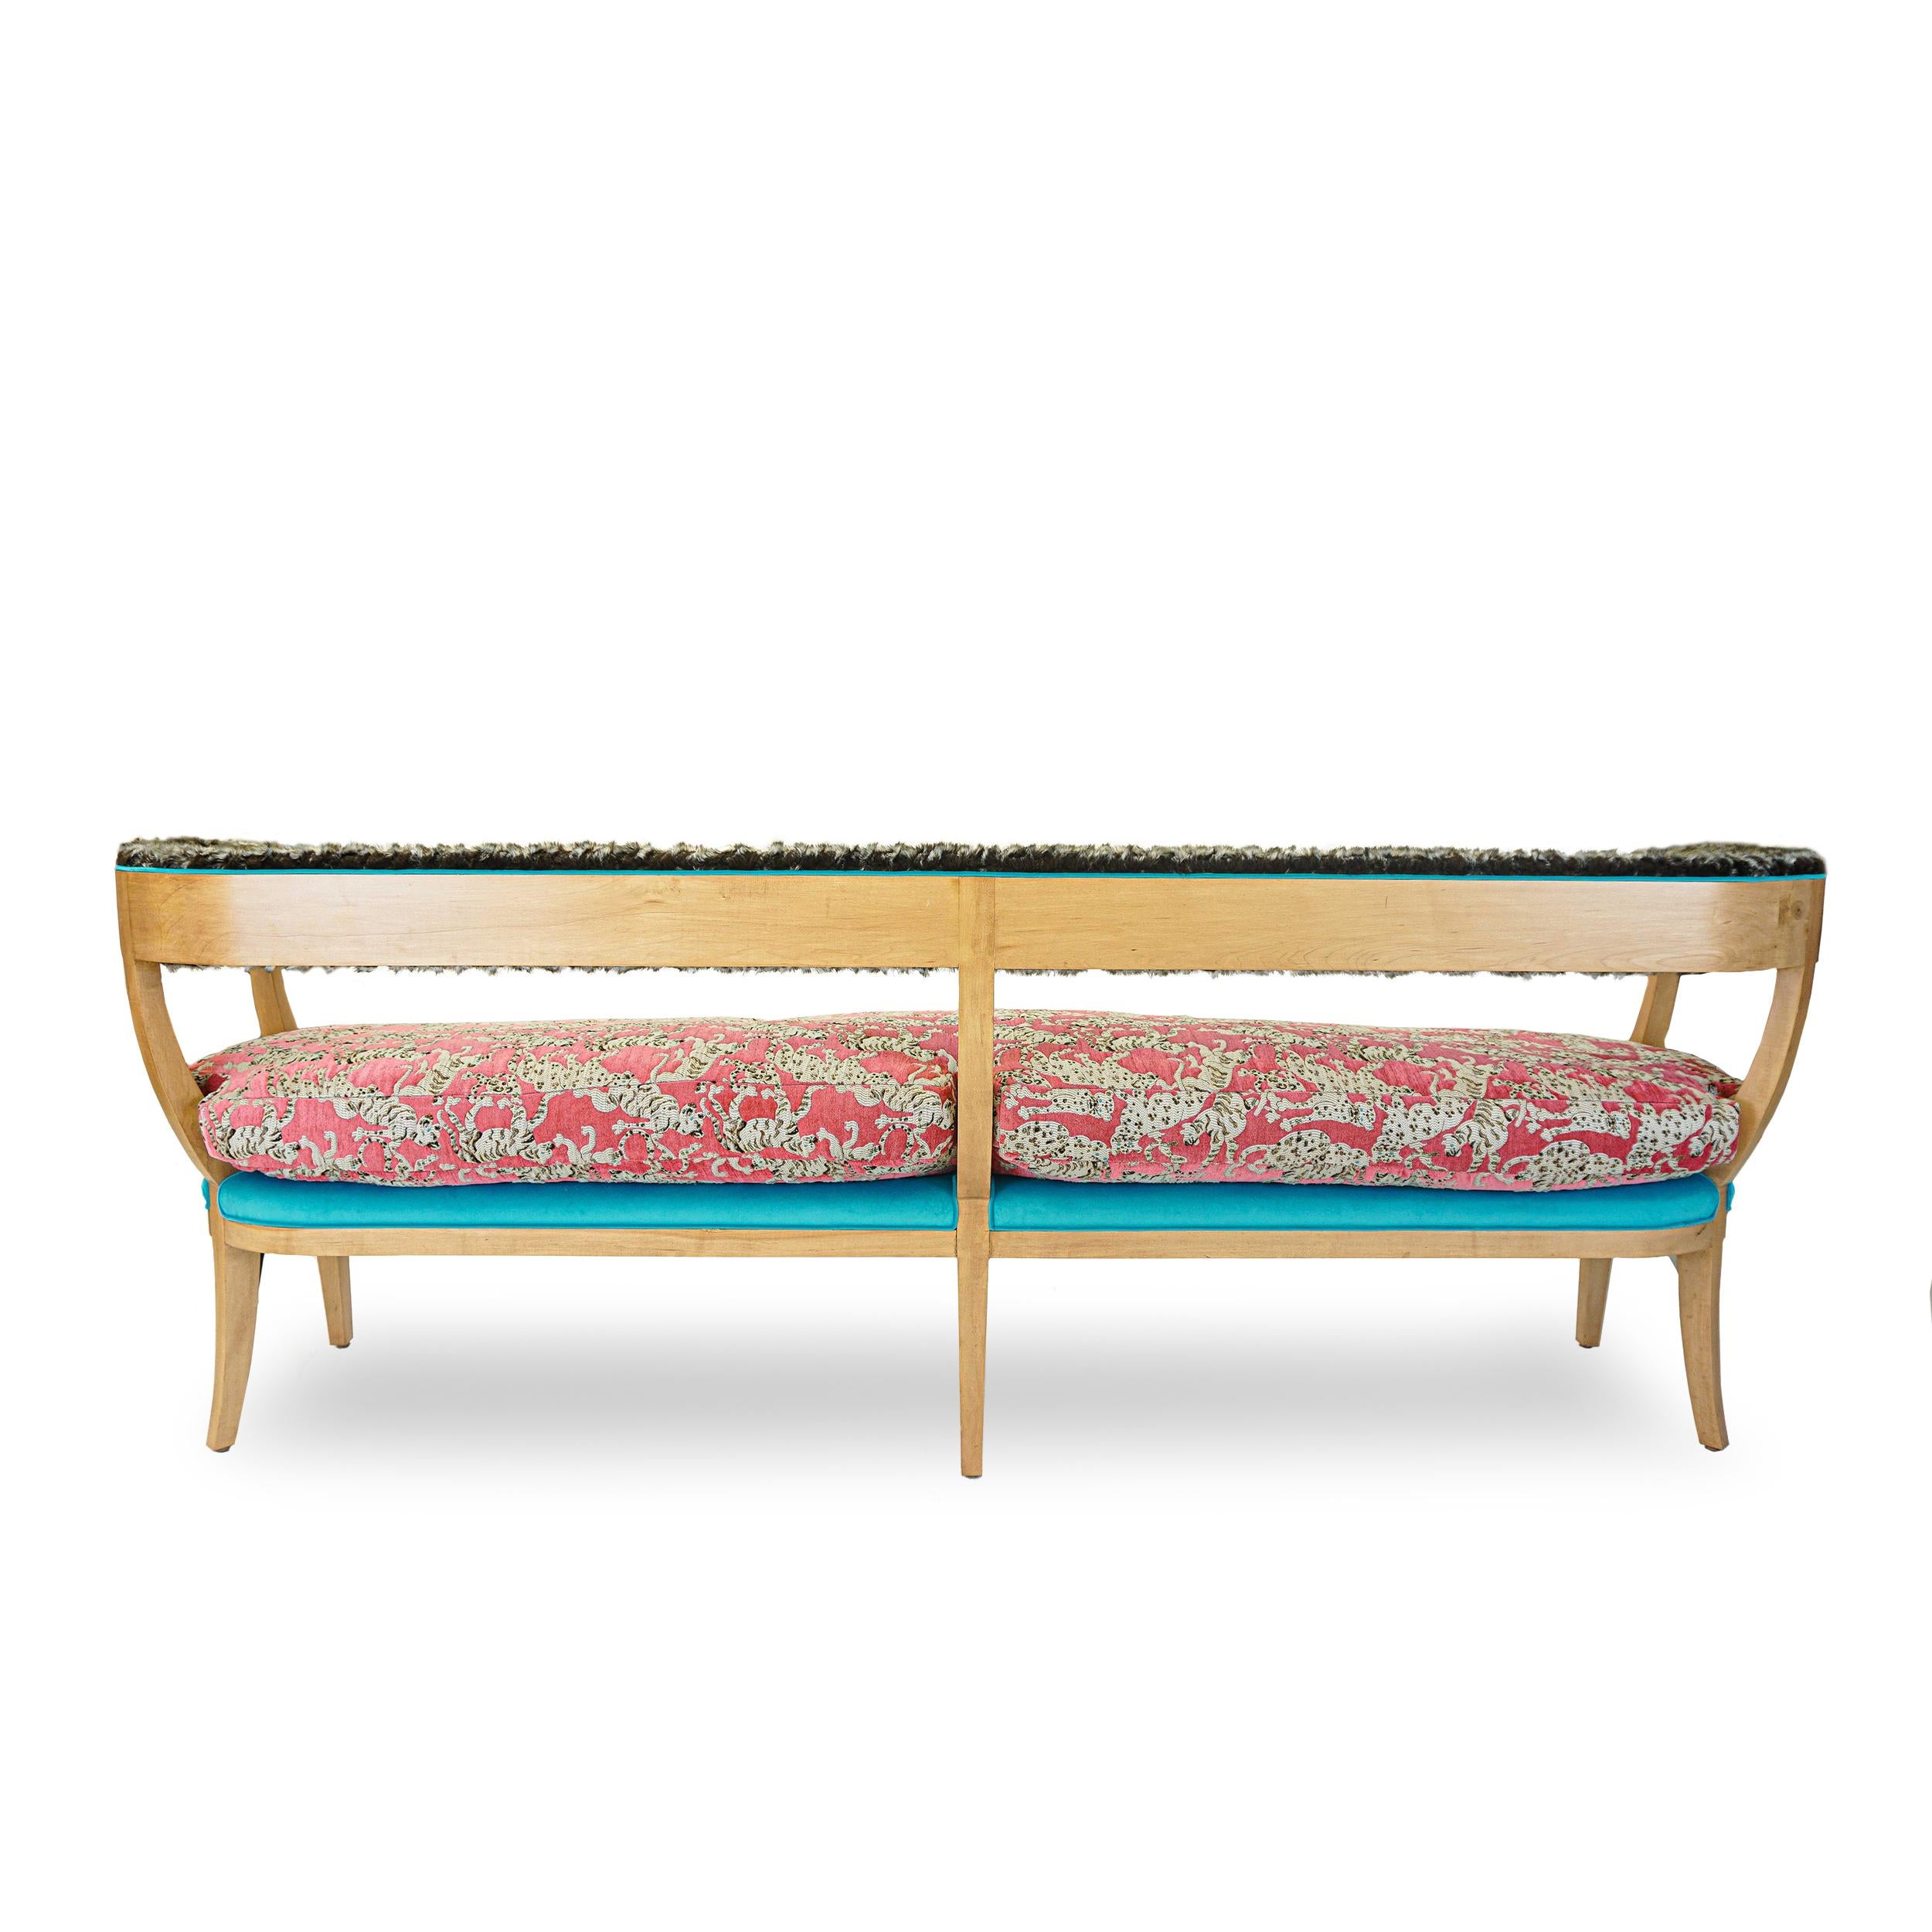 Japanese Inspired Bench with Wild Cat Print and Faux Fur For Sale 1